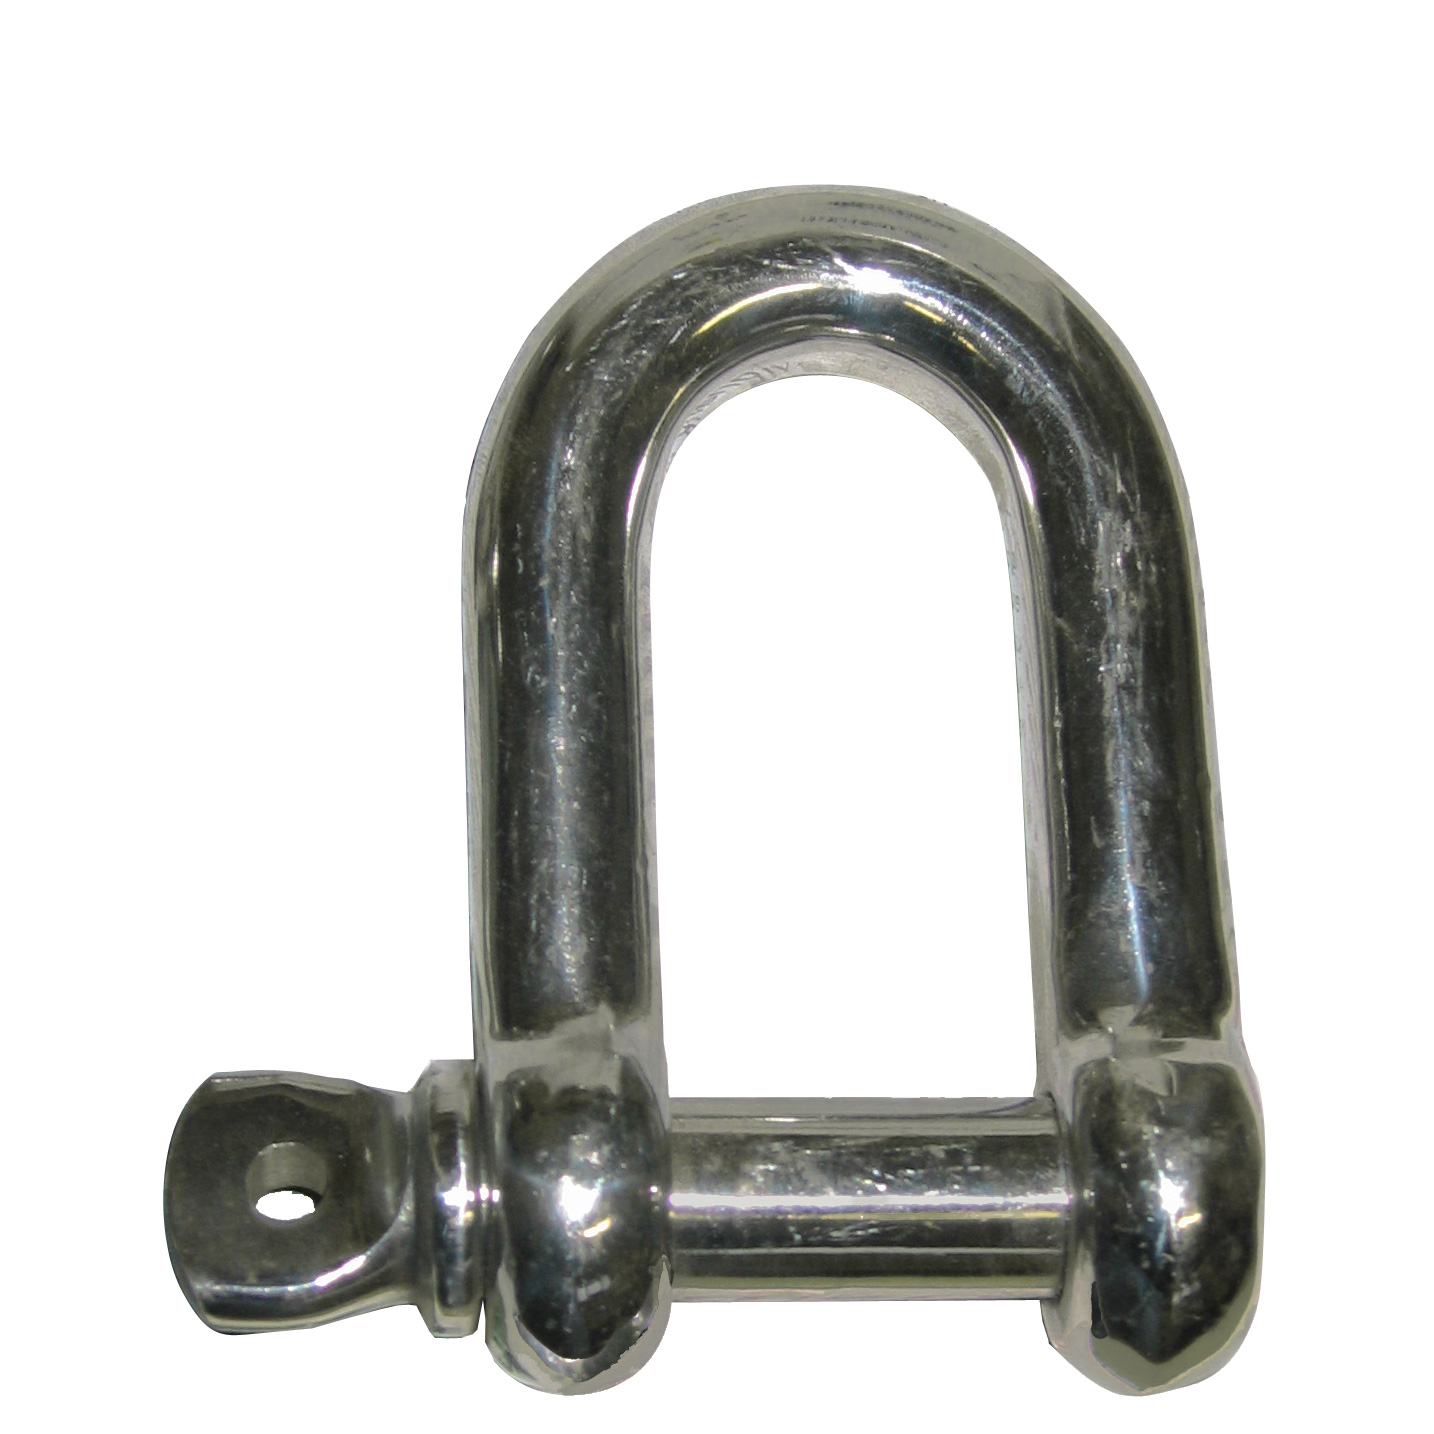 Stainless steel shackles